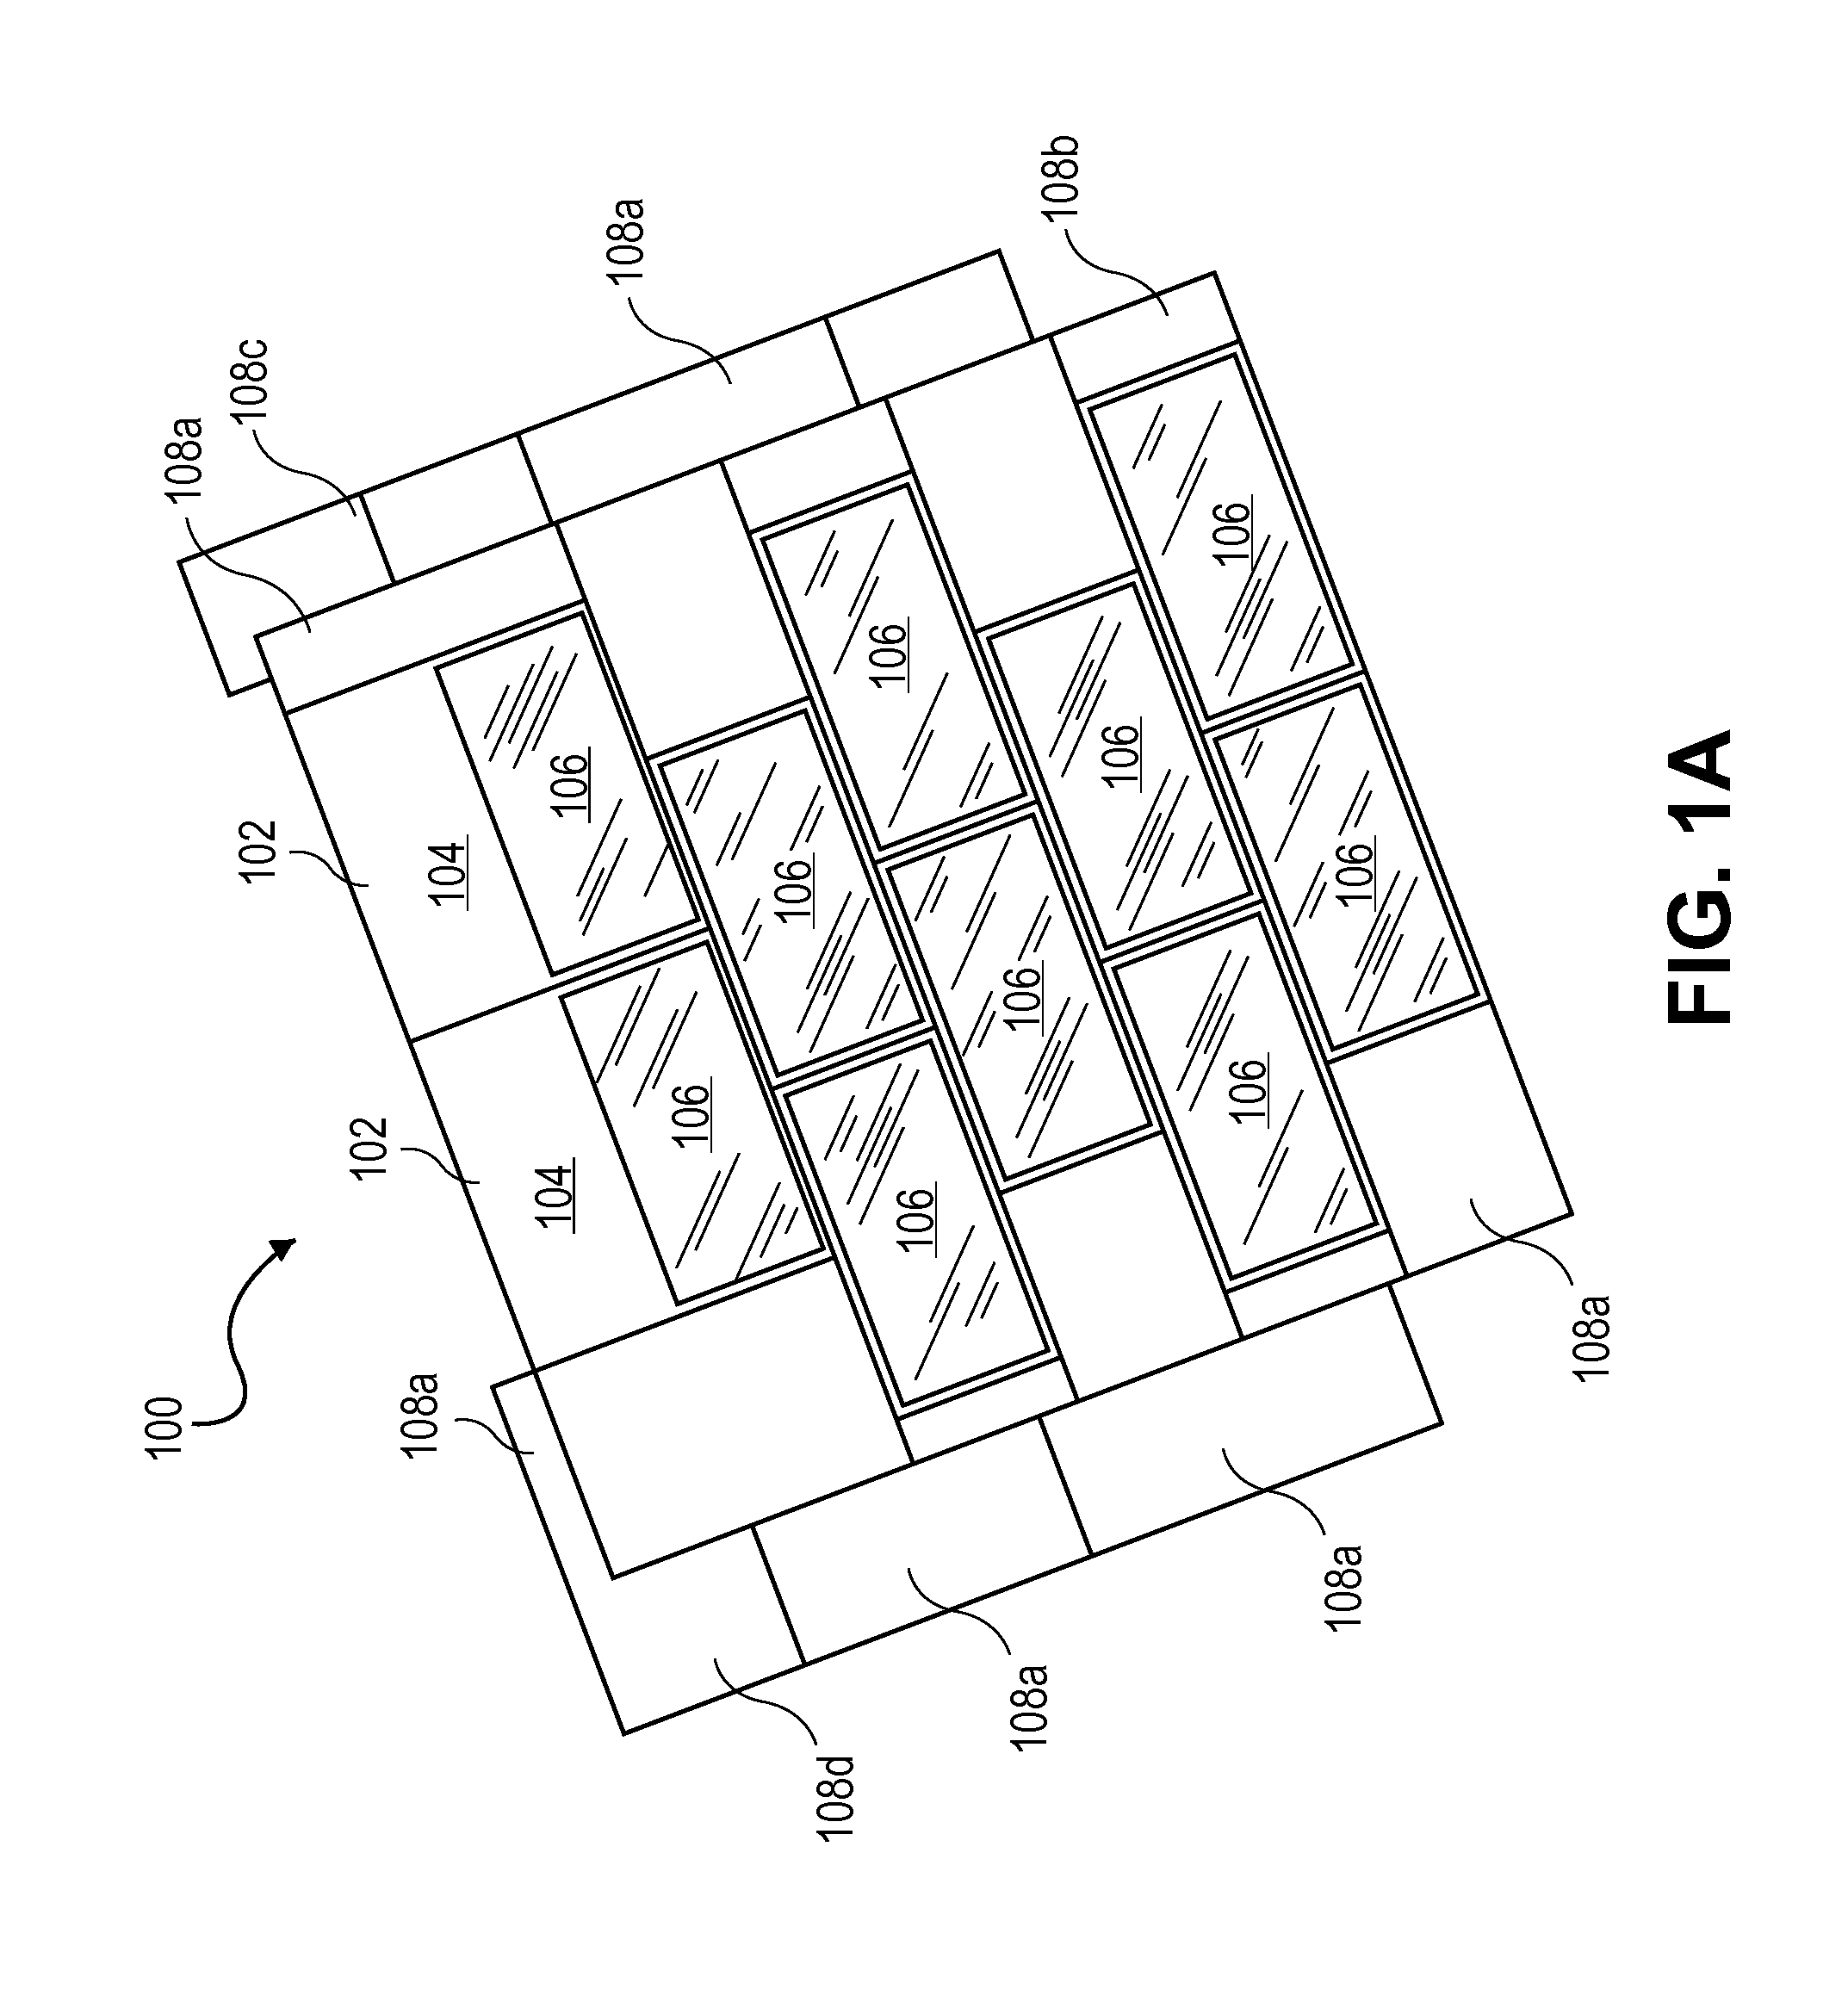 Photovoltaic device for measuring irradiance and temperature